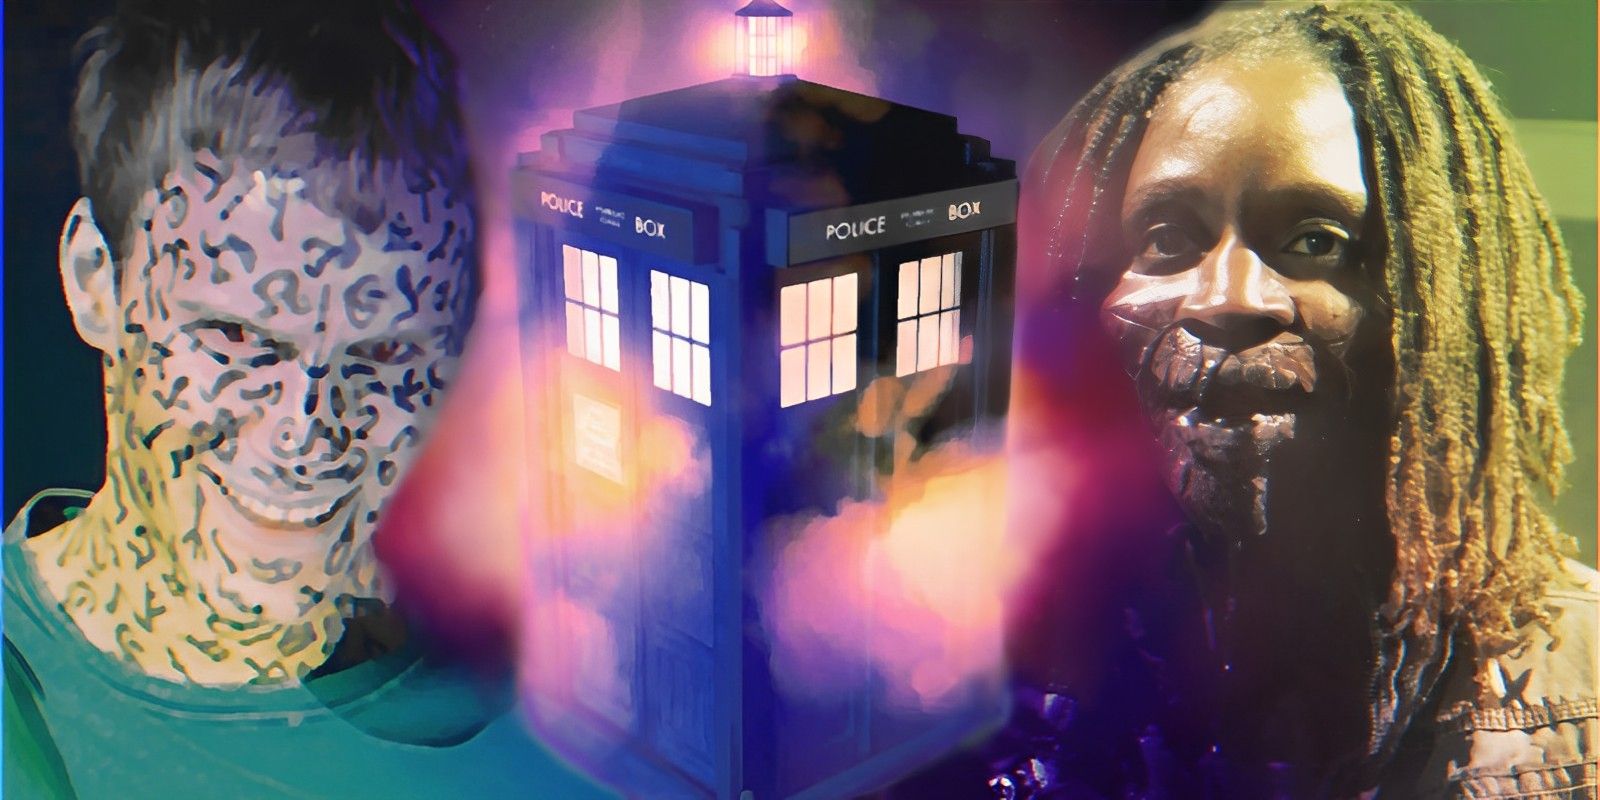 Doctor Who’s The Beast (in Toby) and The Flood (in Maggie) alongside The TARDIS.